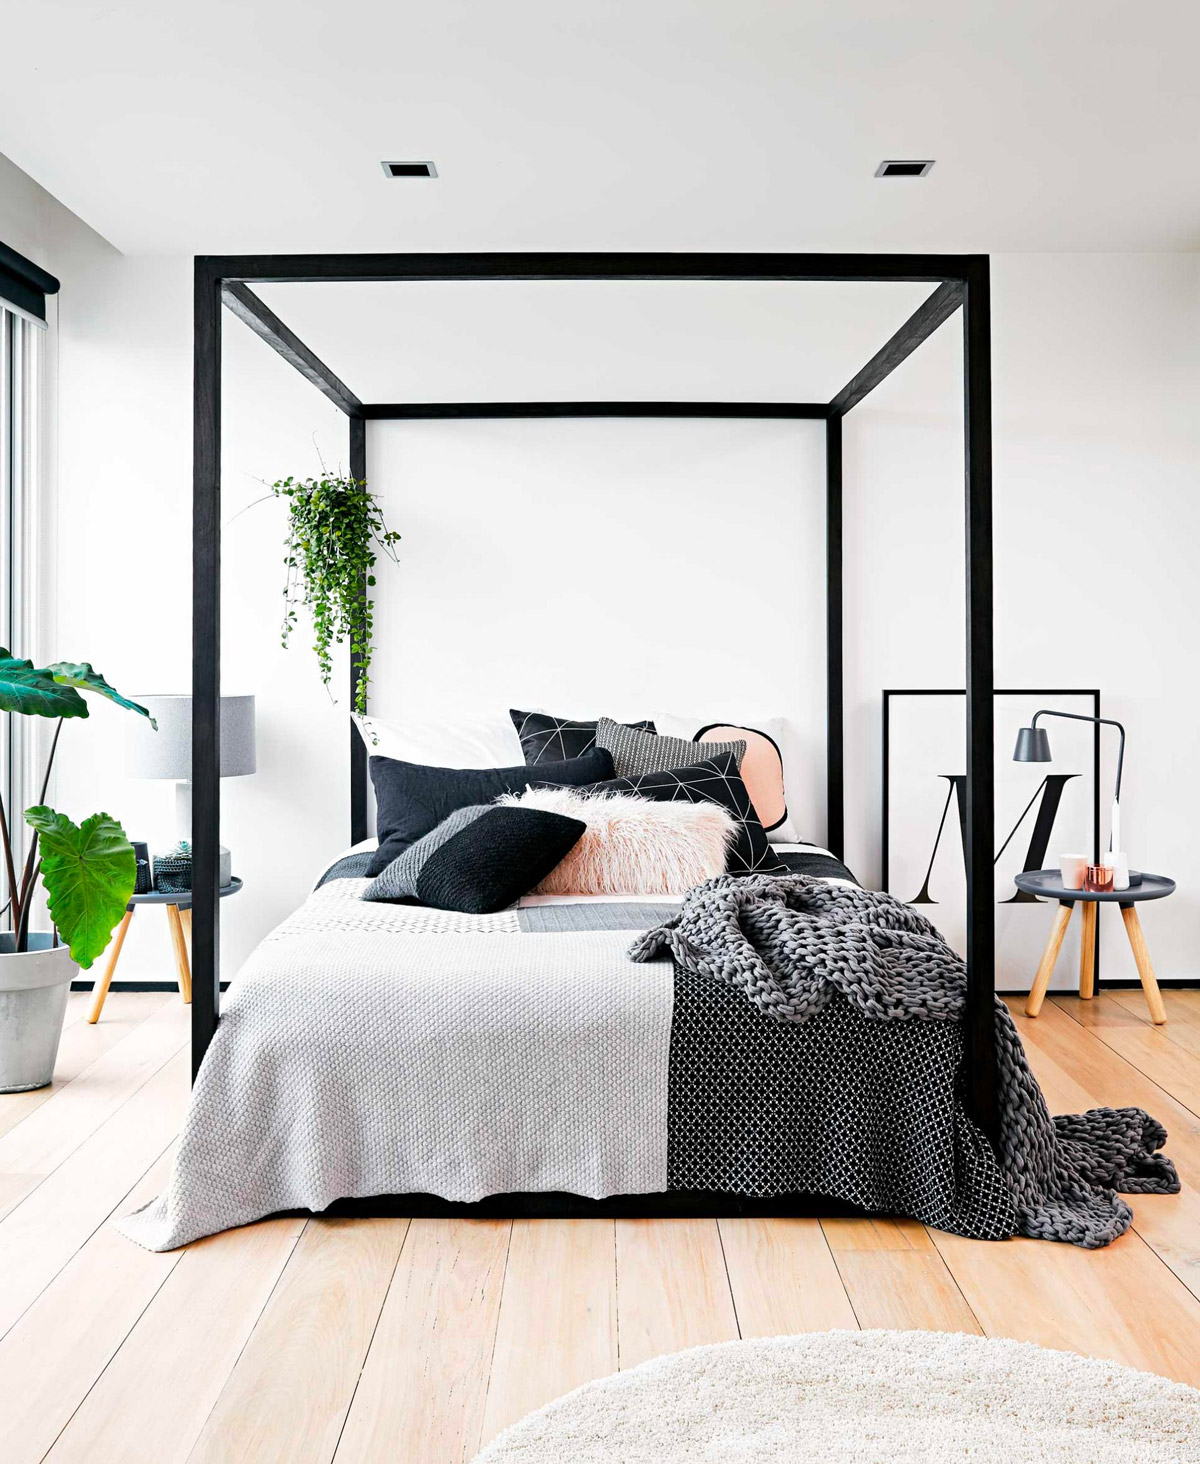 4 Poster Beds That Make An Awesome Bedroom, Bed Frame Poles